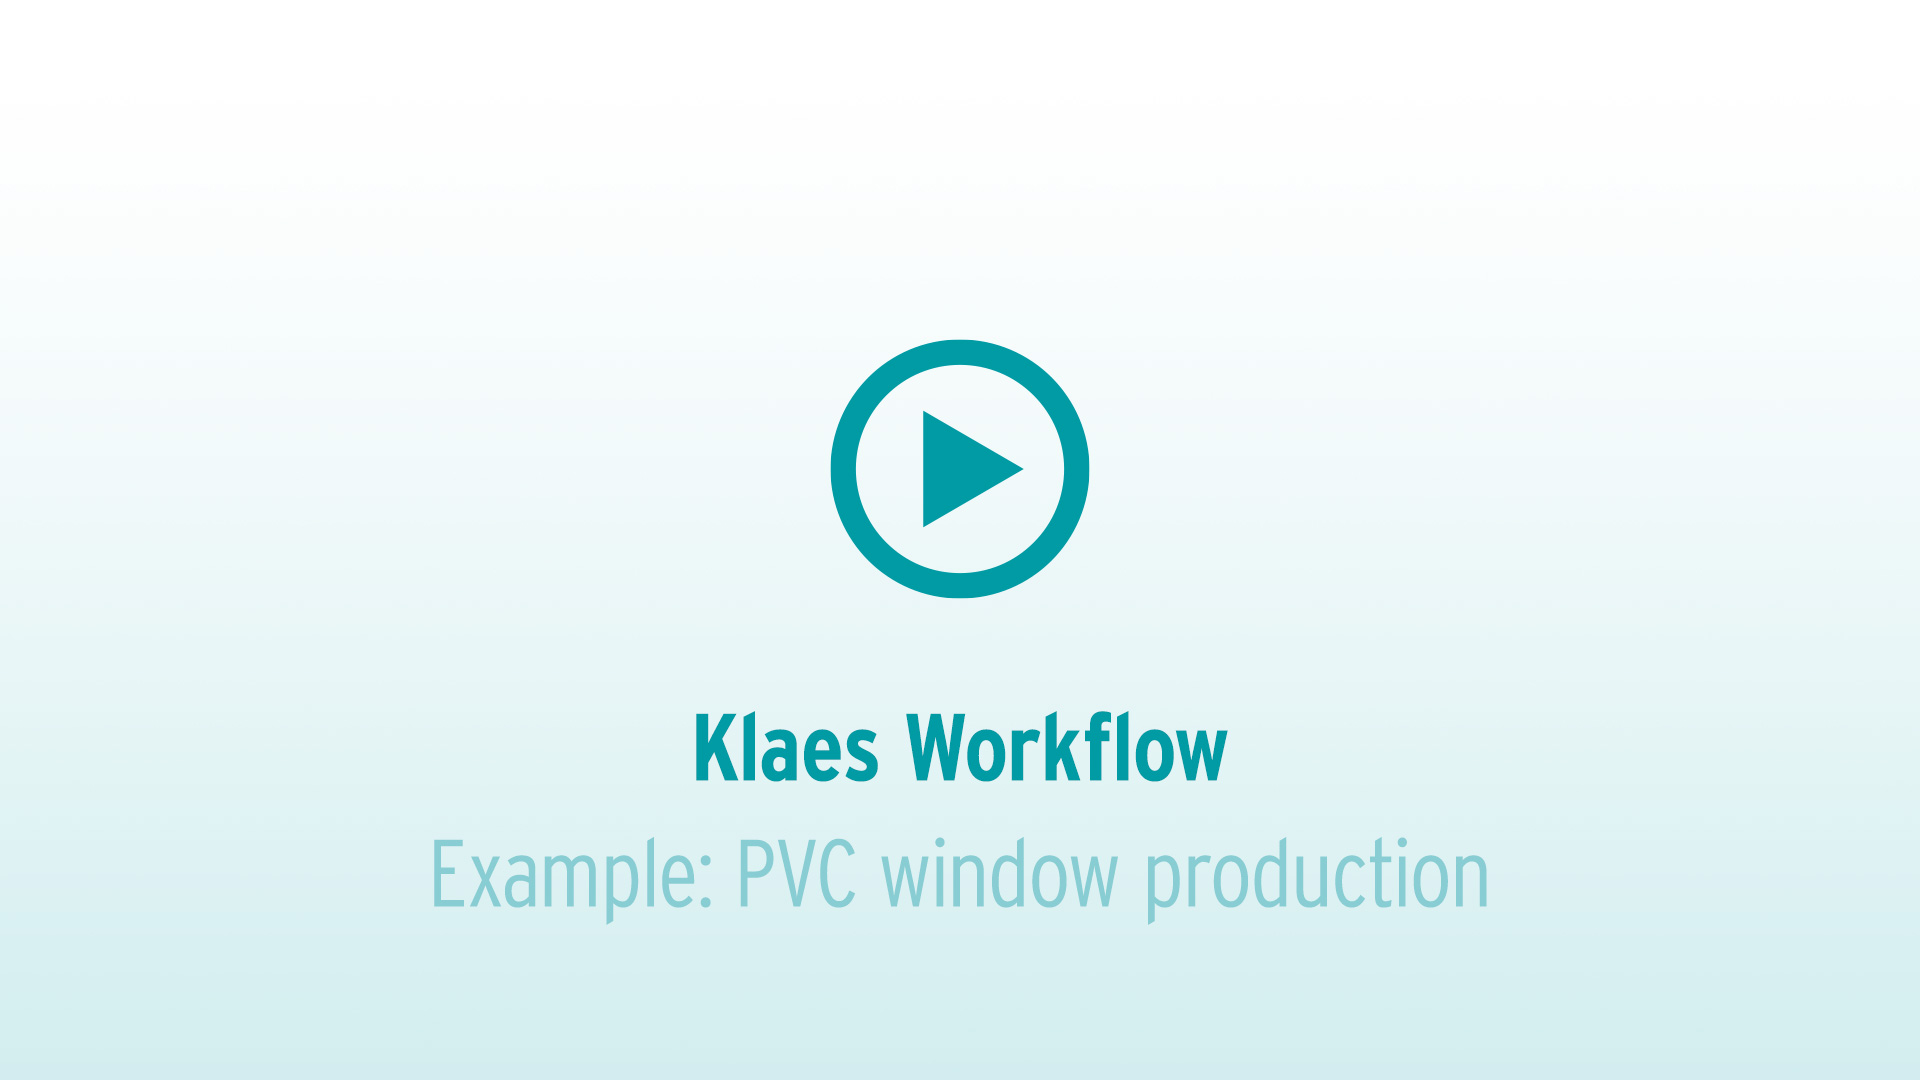 Klaes Workflow - Example: PVC window production with klaes ERP software for windows and doors